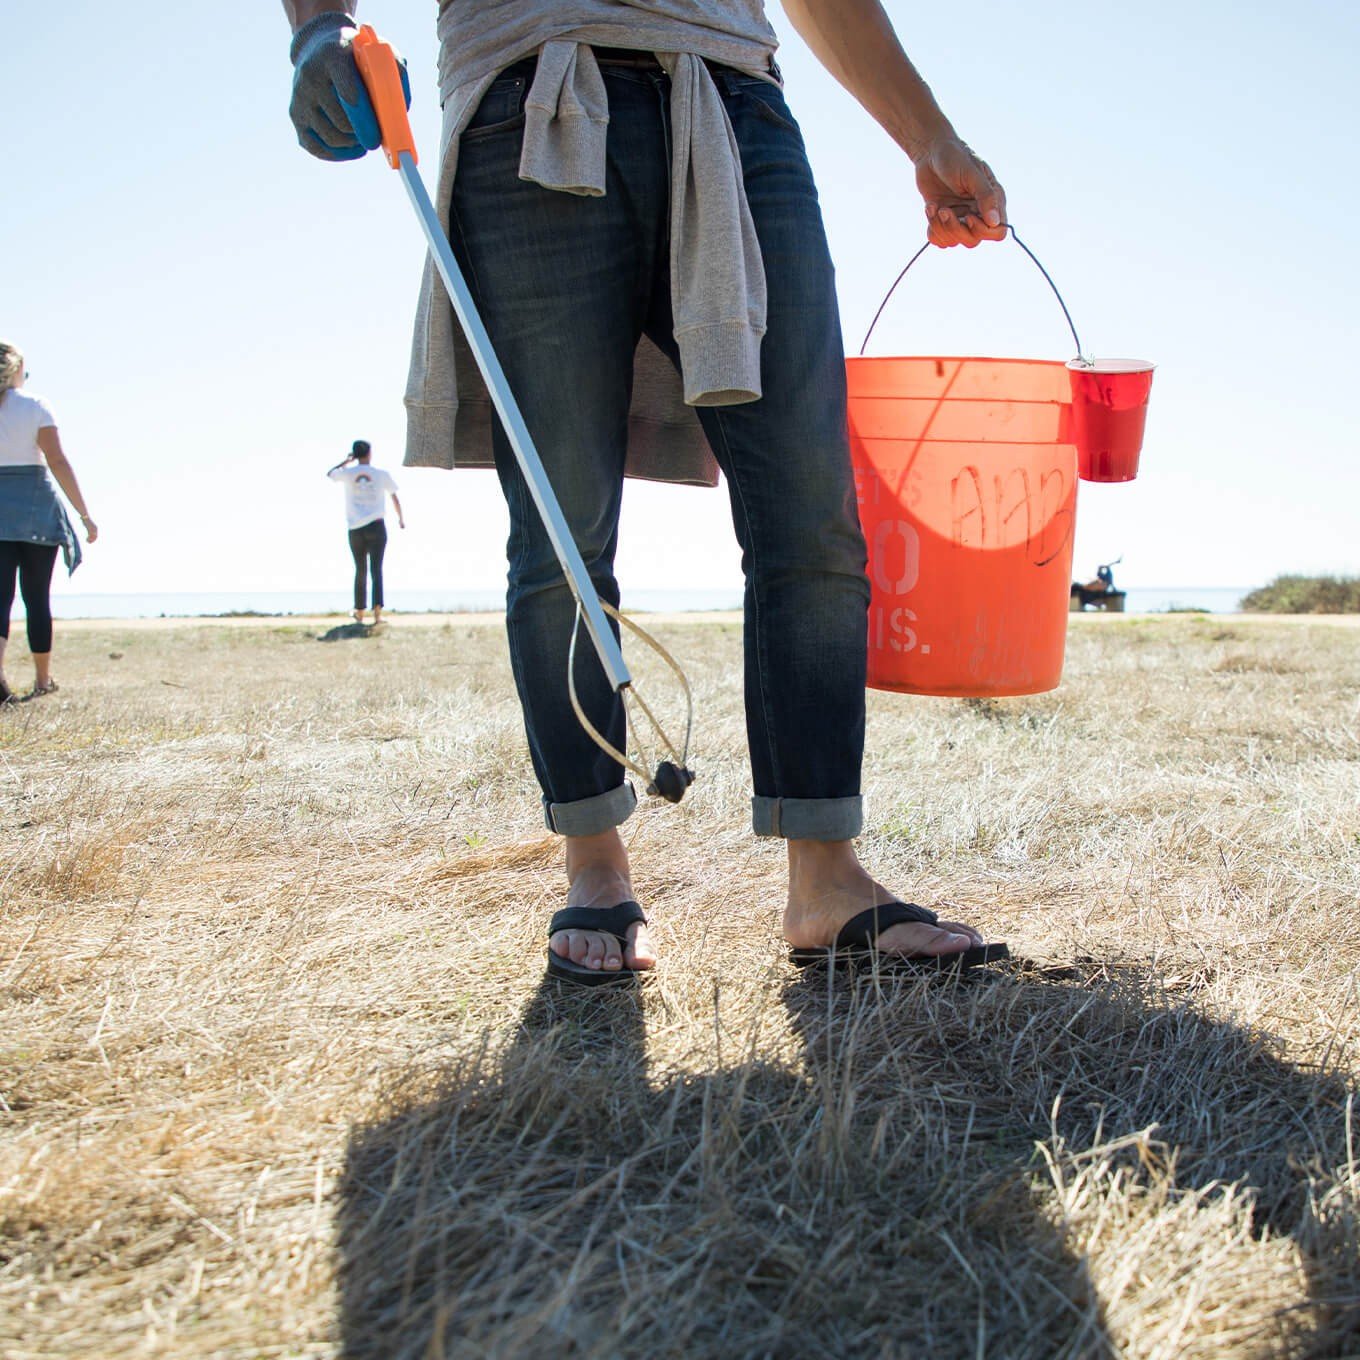 Volunteer uses grabber and bucket to pick up trash along beach